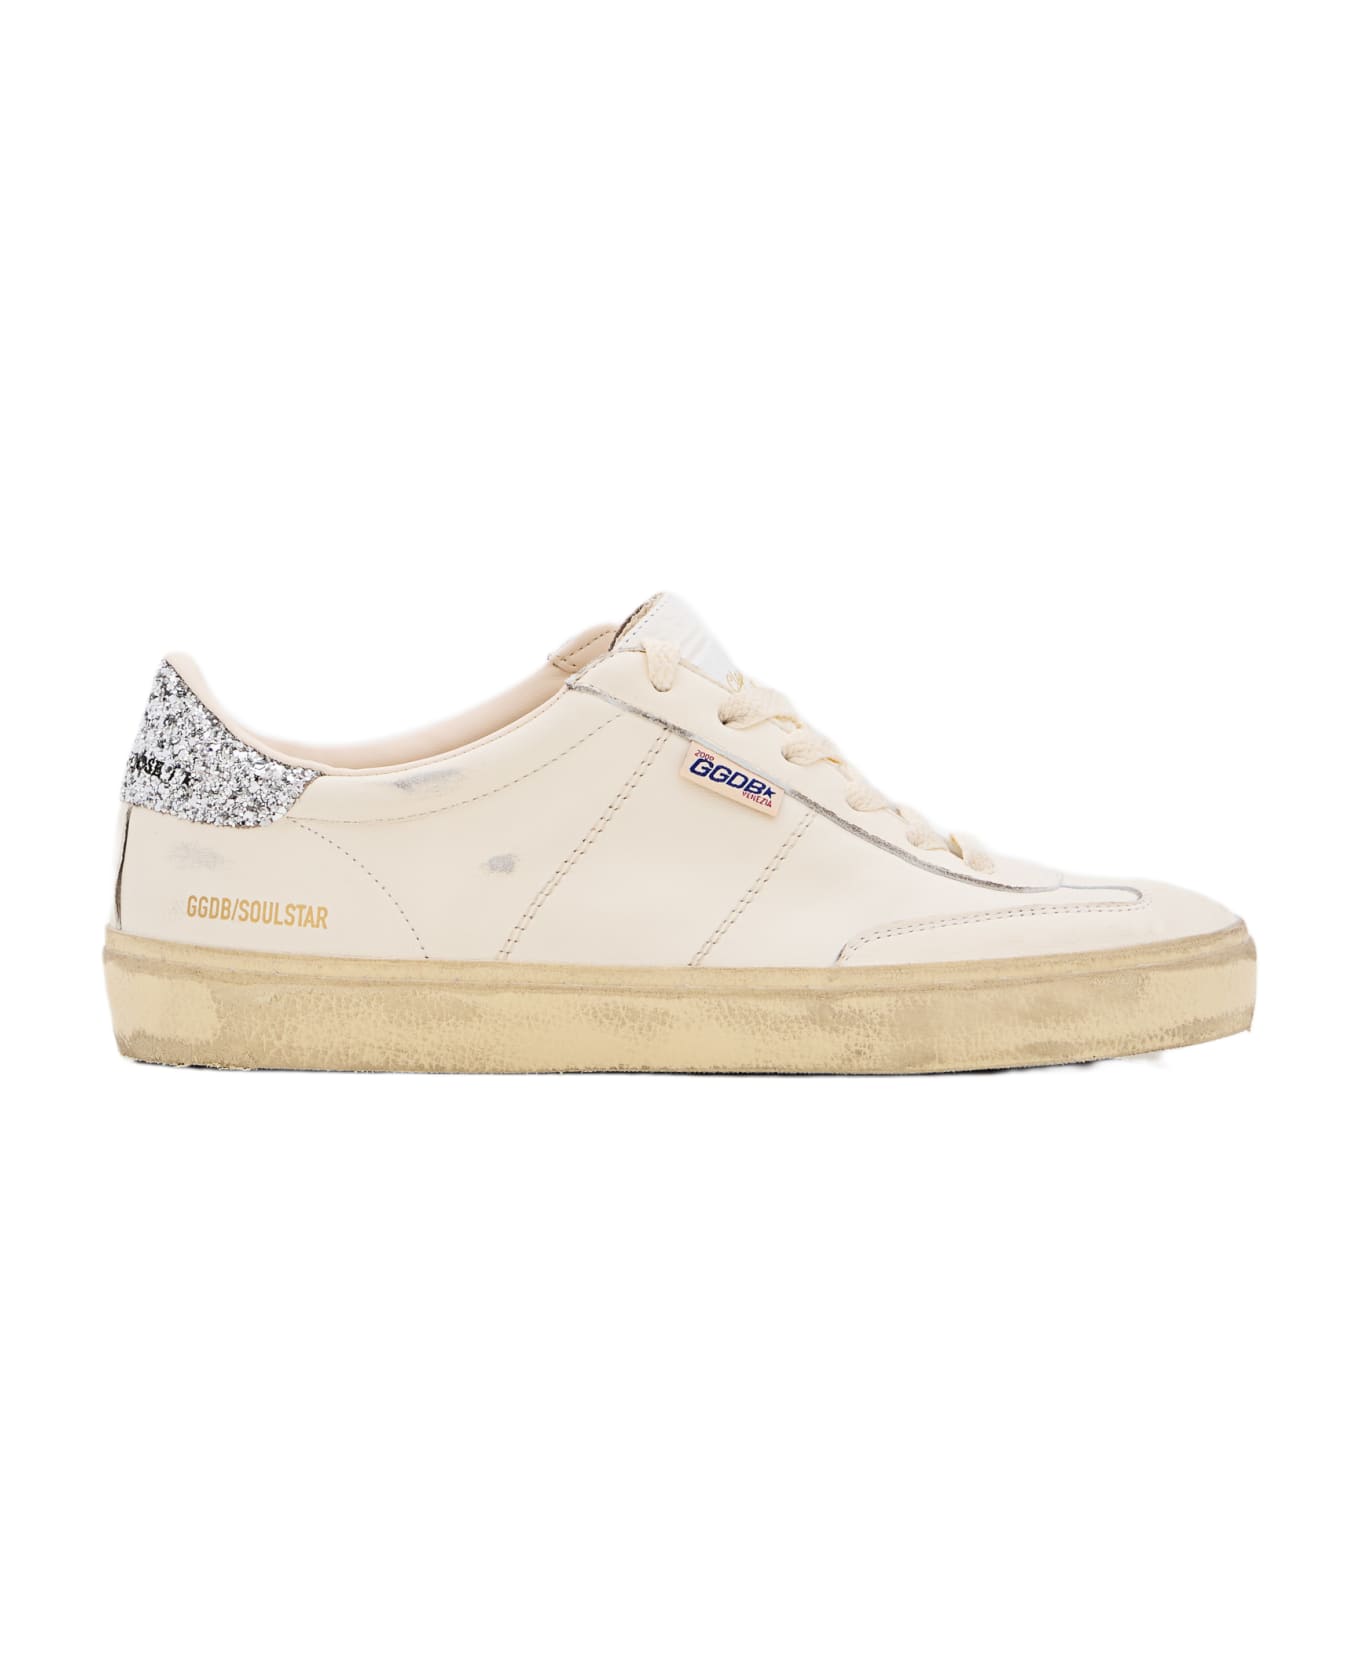 Golden Goose Soul Star Distressed Glittered Lace-up Sneakers - White/Silver スニーカー